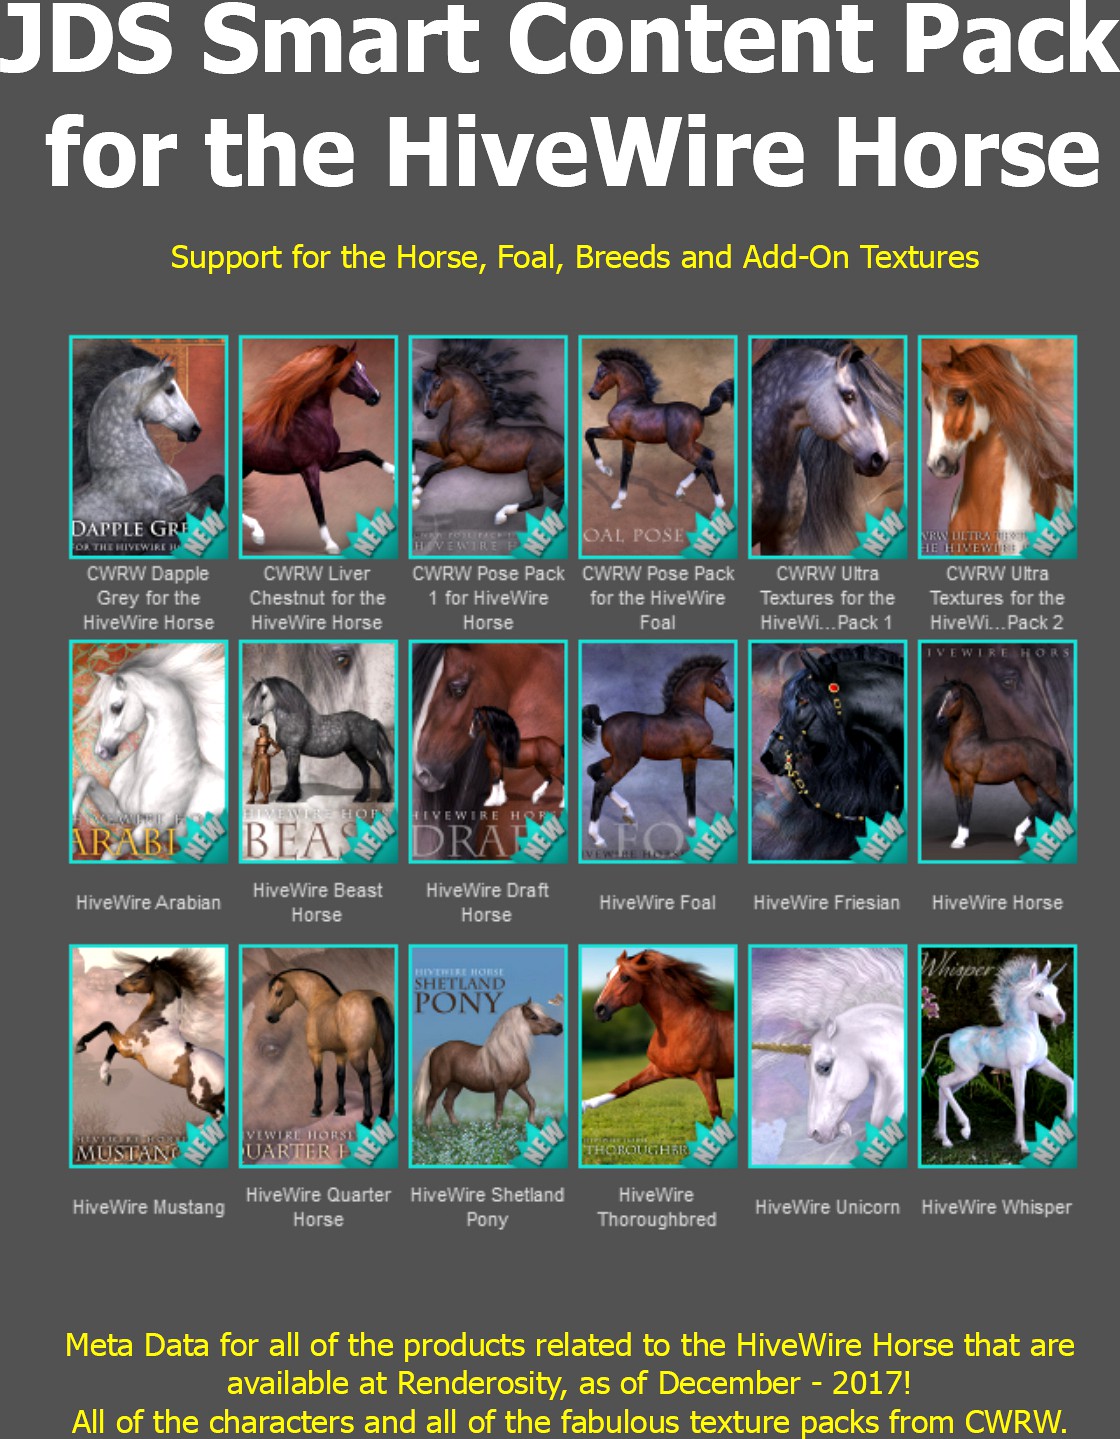 JDS Smart Content Pack for the HiveWire Horse